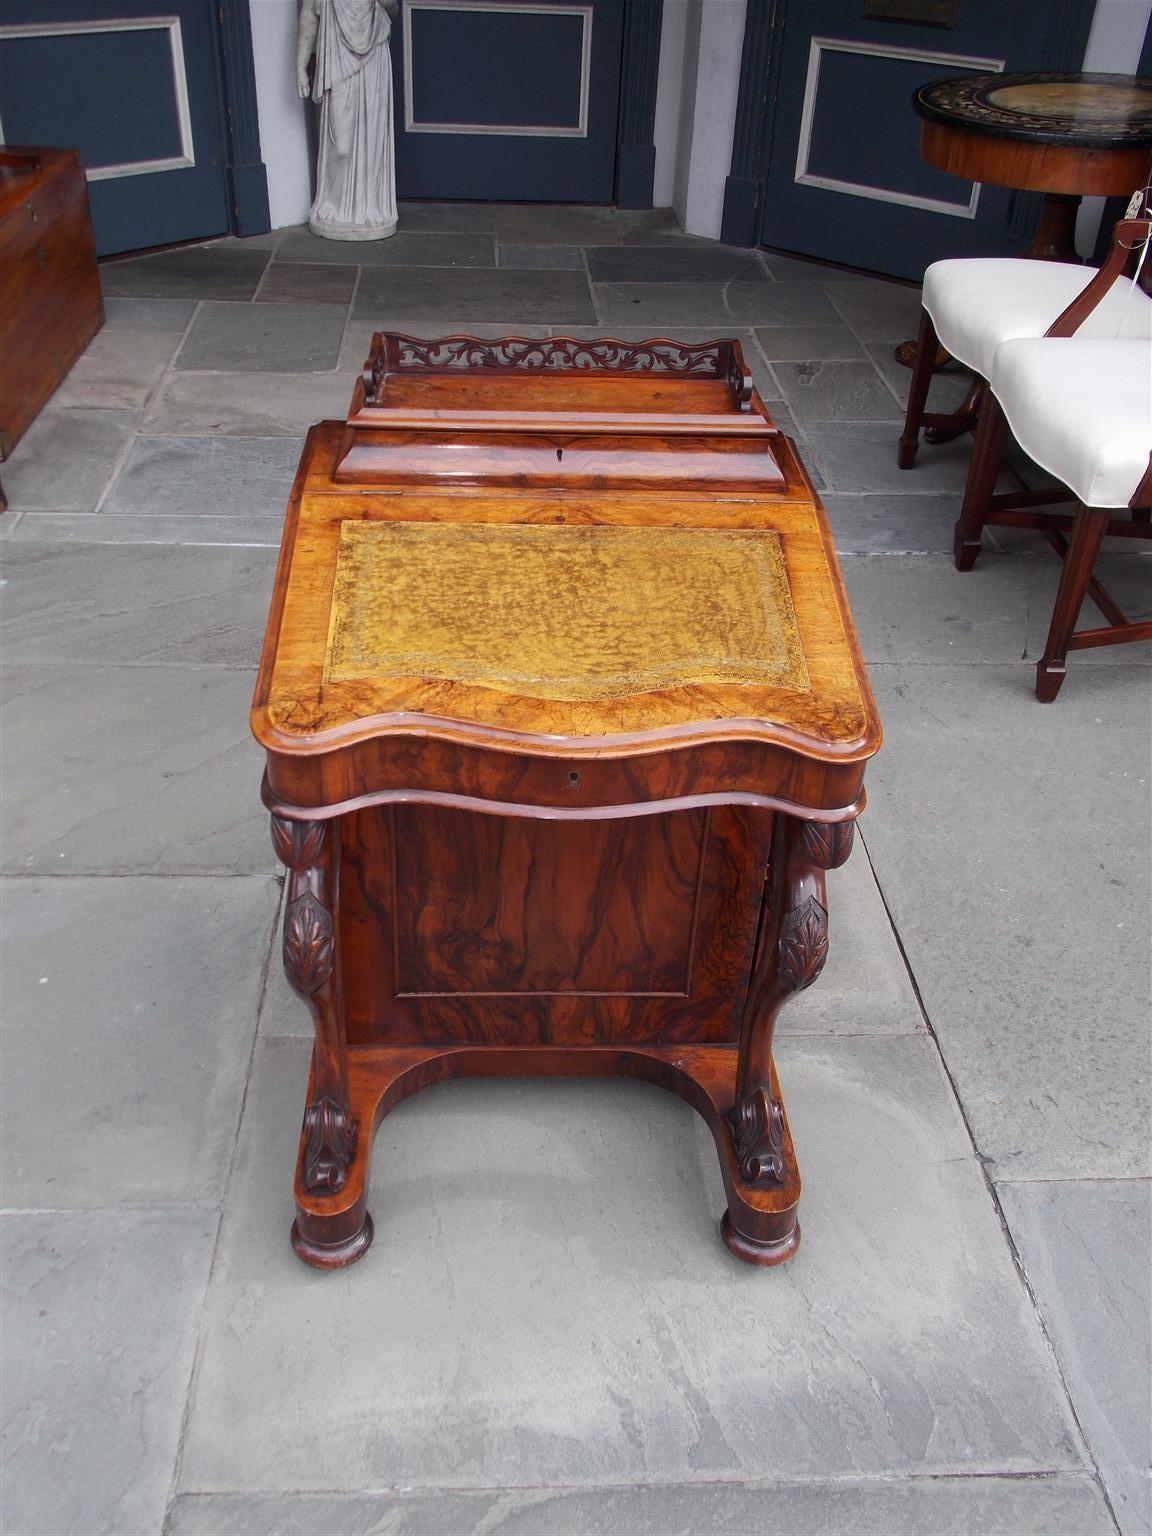 English burl walnut Davenport desk with carved floral fret work, hinged lid revealing fitted interior with original ink wells, leather hinged writing surface with four fitted interior drawers, hinged side door with four interior sliding drawers and